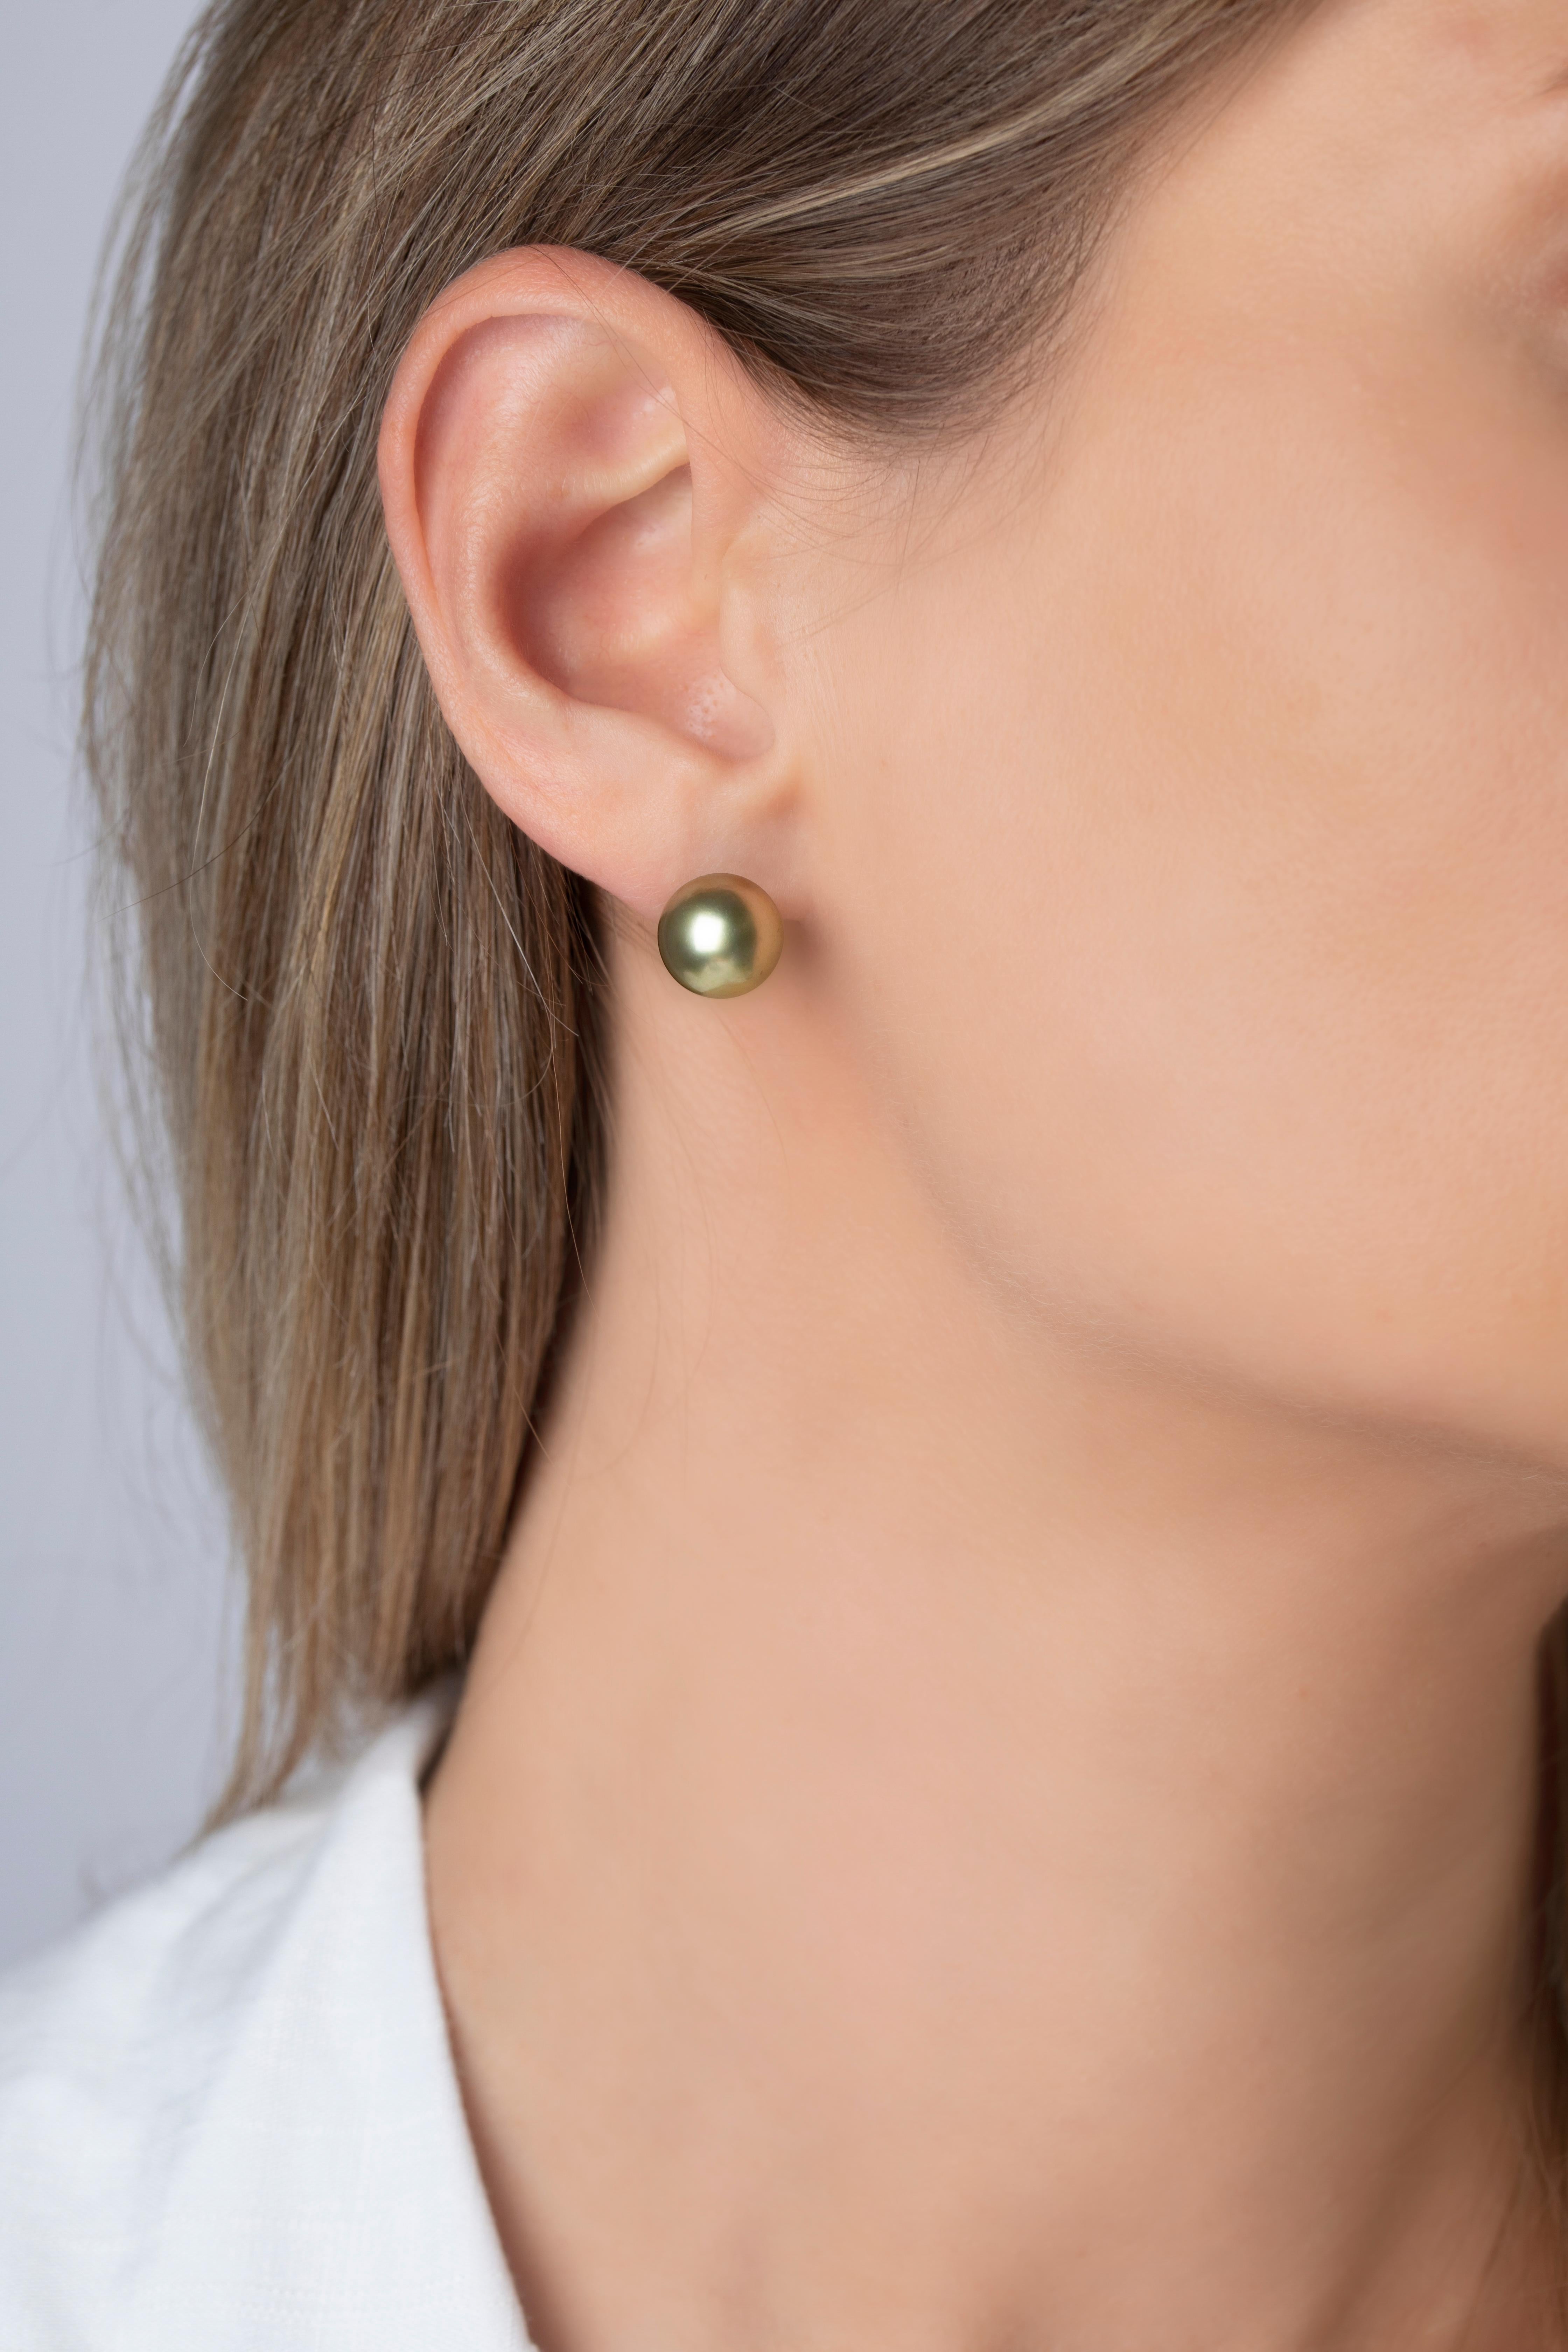 These unique pistachio-coloured Tahitian pearl stud from Yoko London offer an exceptional twist on a classic style. The simple 18 Karat White Gold setting allows the extraordinary colour of the pearl to speak for itself. To achieve the spectacular